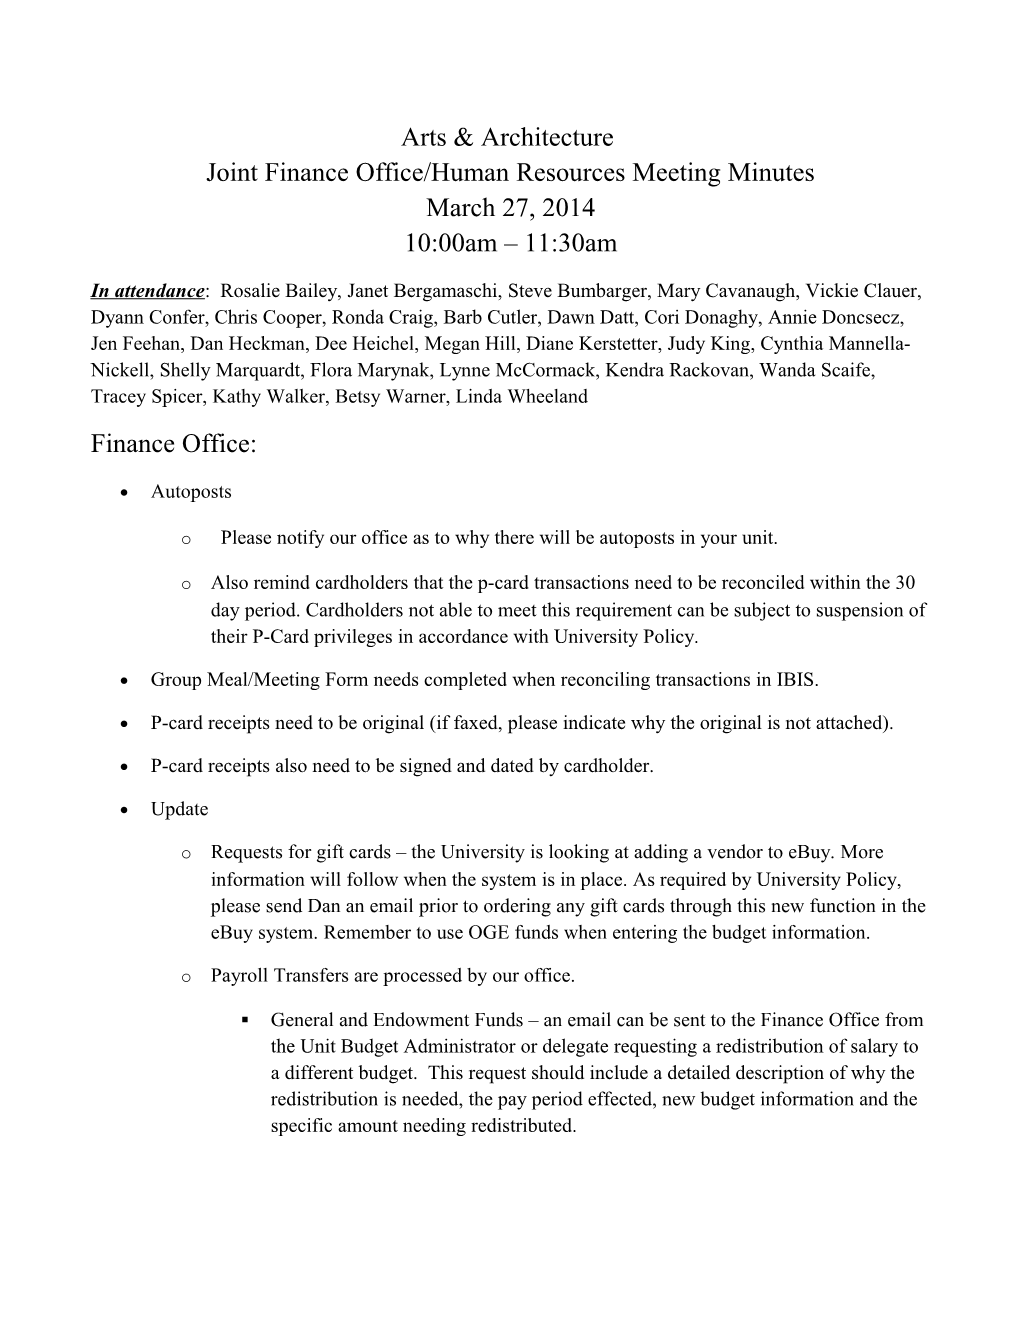 Joint Finance Office/Human Resources Meeting Minutes